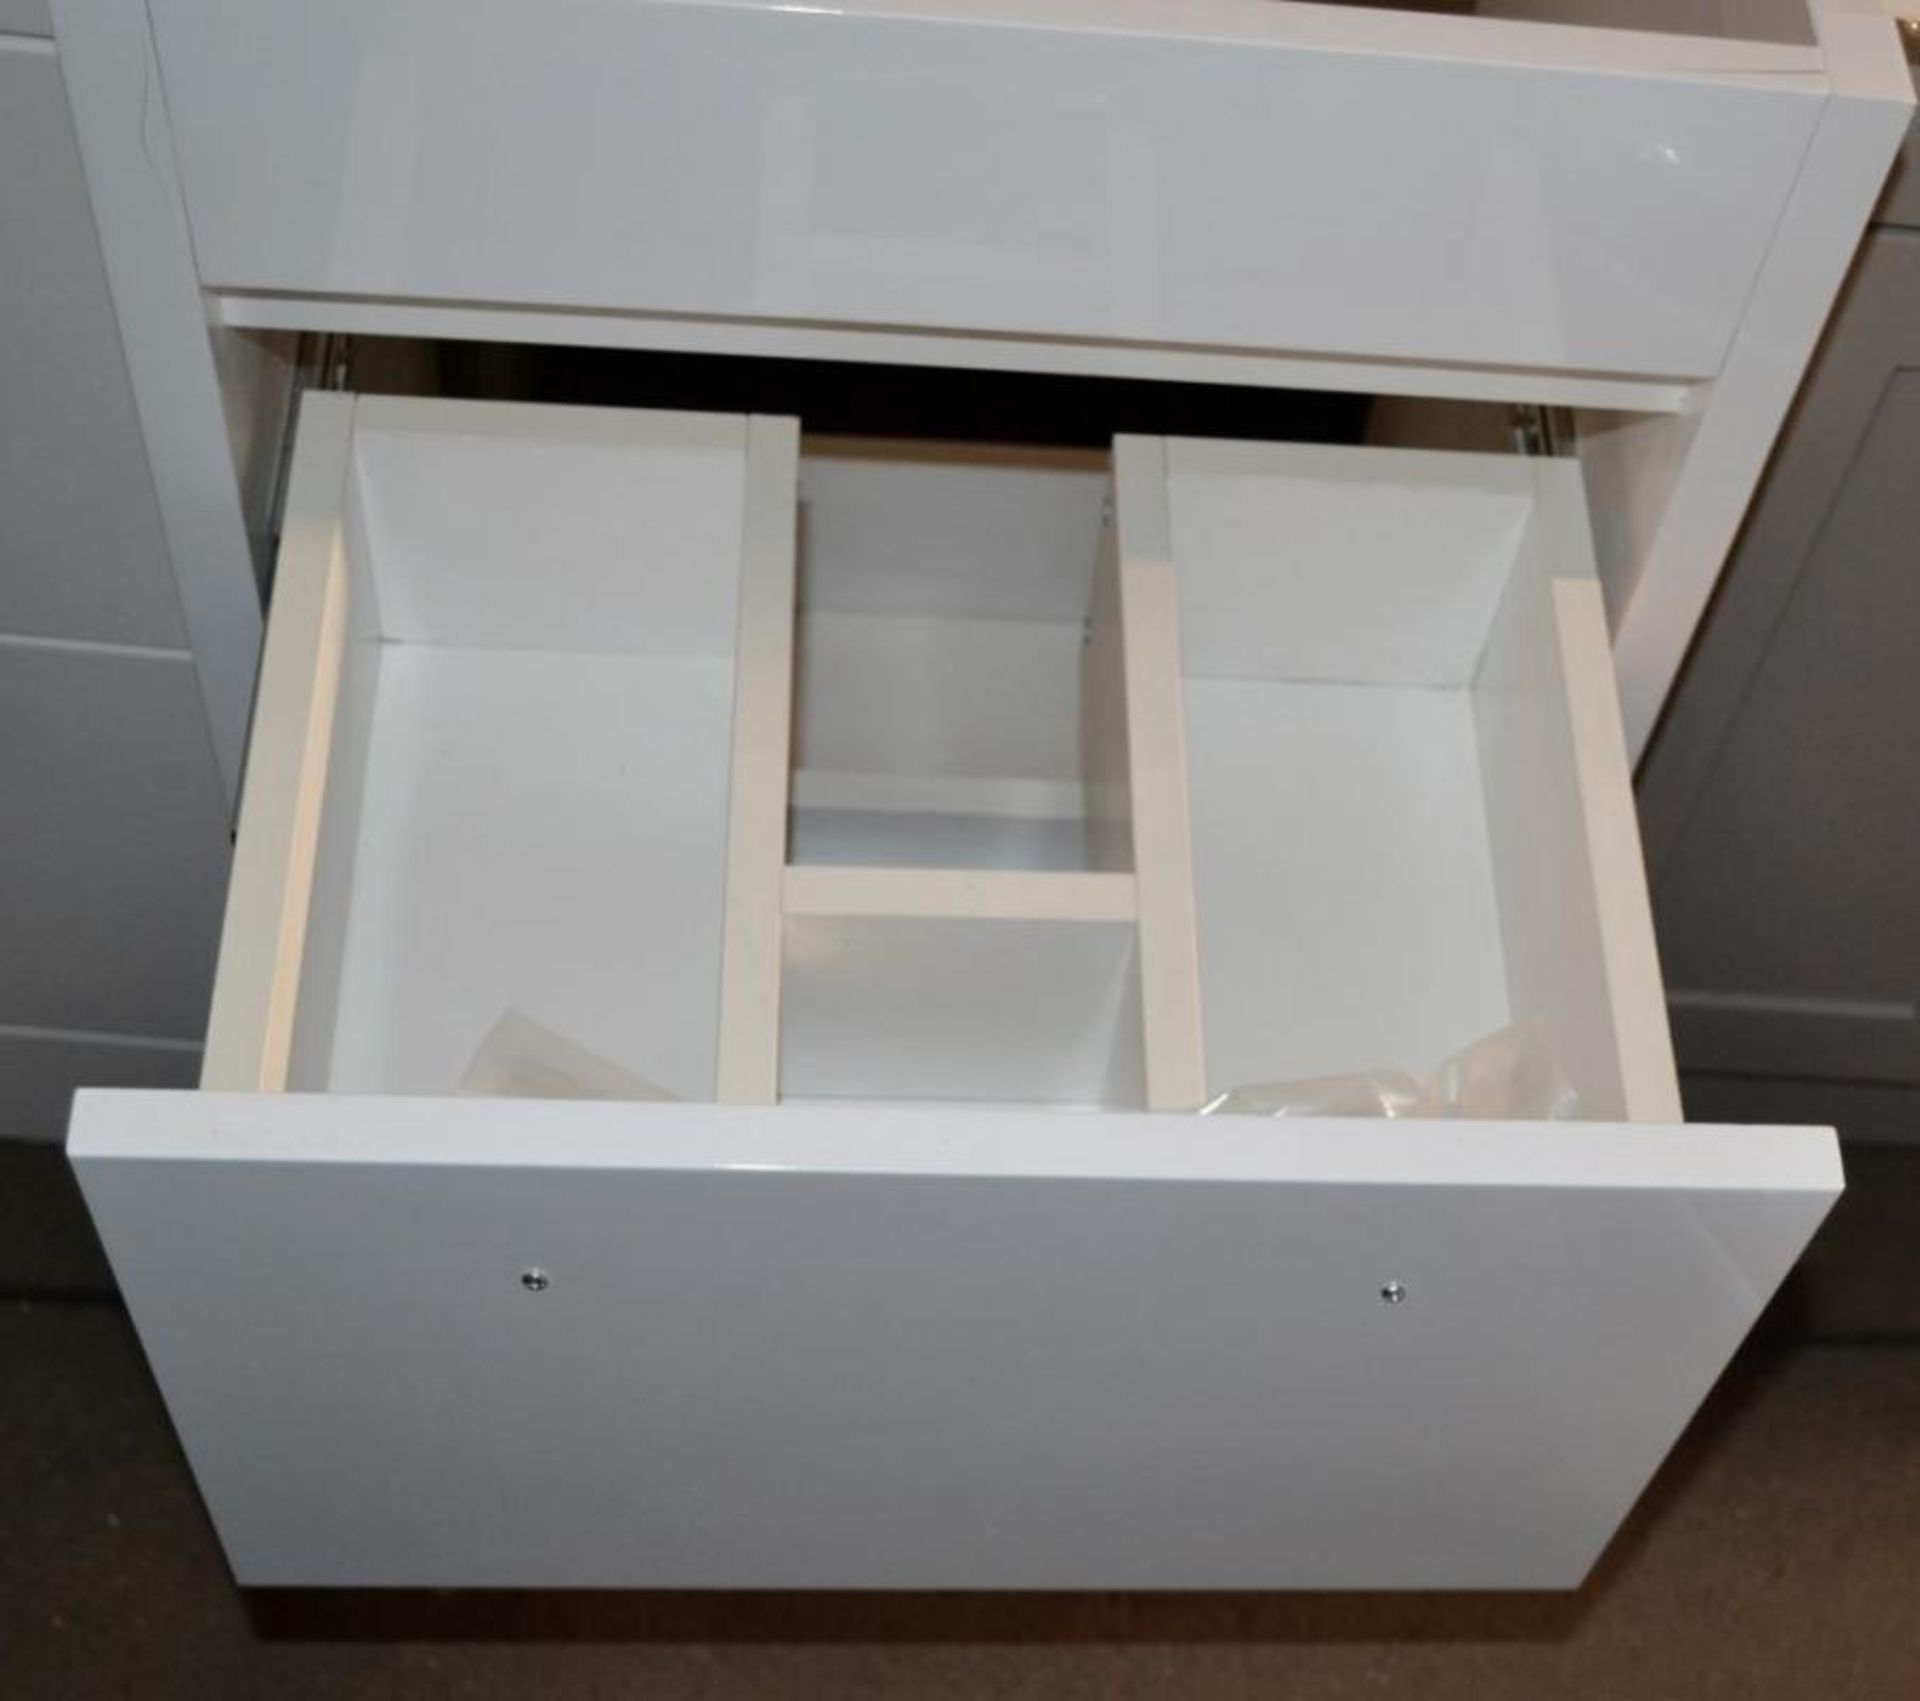 1 x Freestanding 2-Drawer Vanity Basin Unit In A Gloss White Finish - New / Unused Stock - Dimension - Image 4 of 6